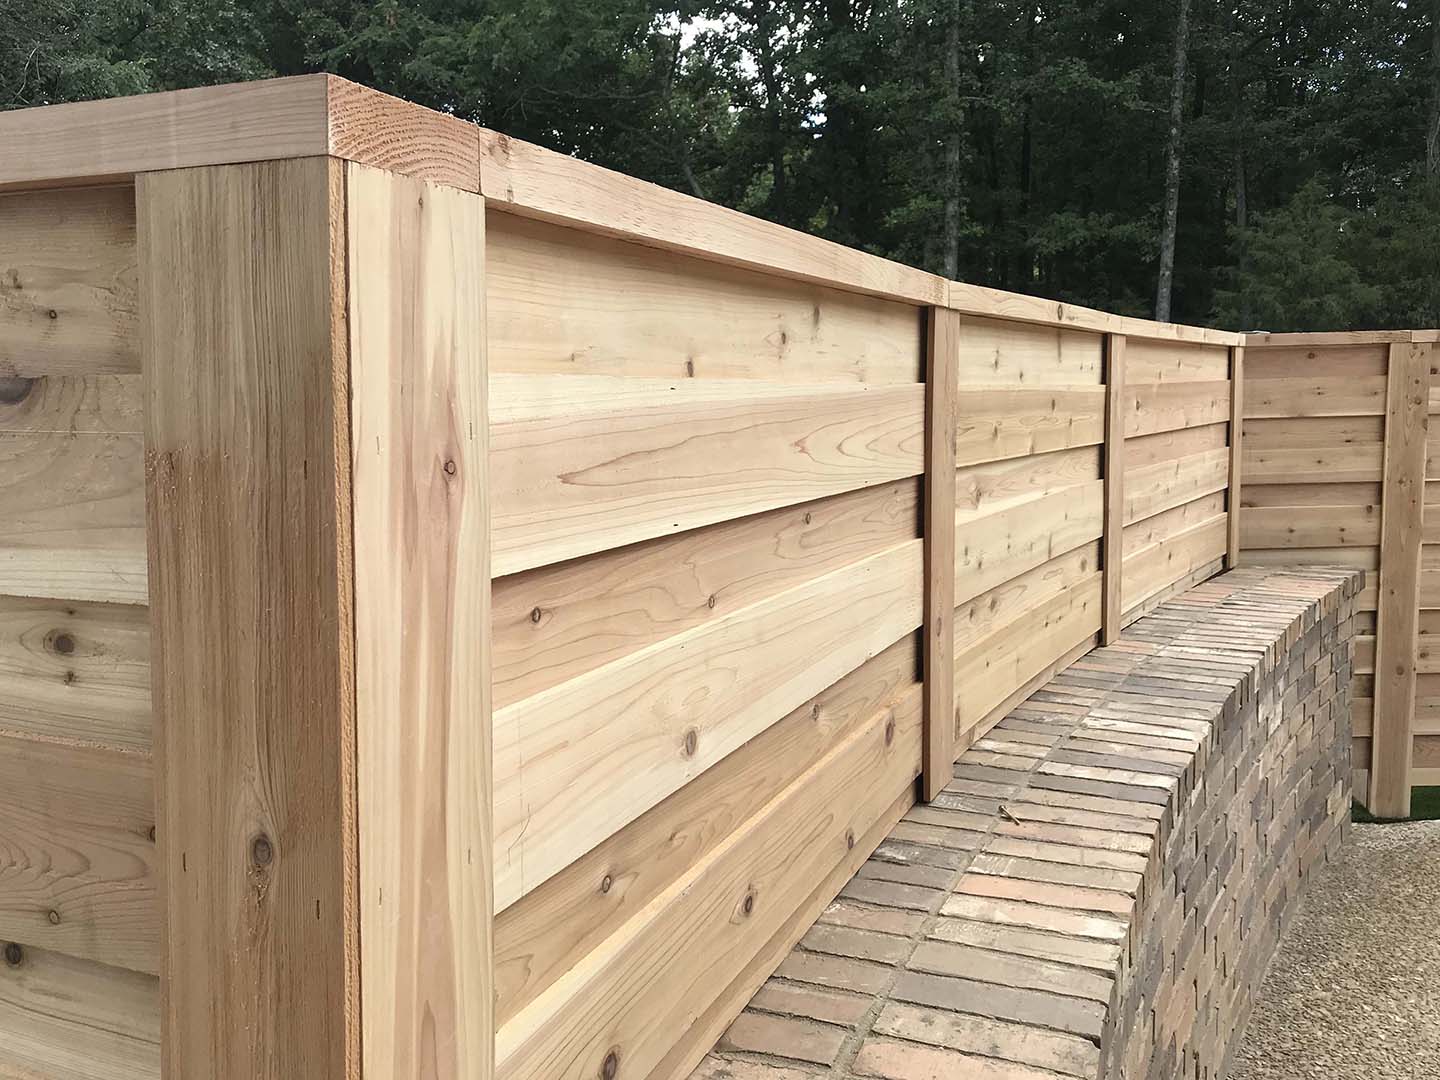 North Little Rock AR cap and trim style wood fence